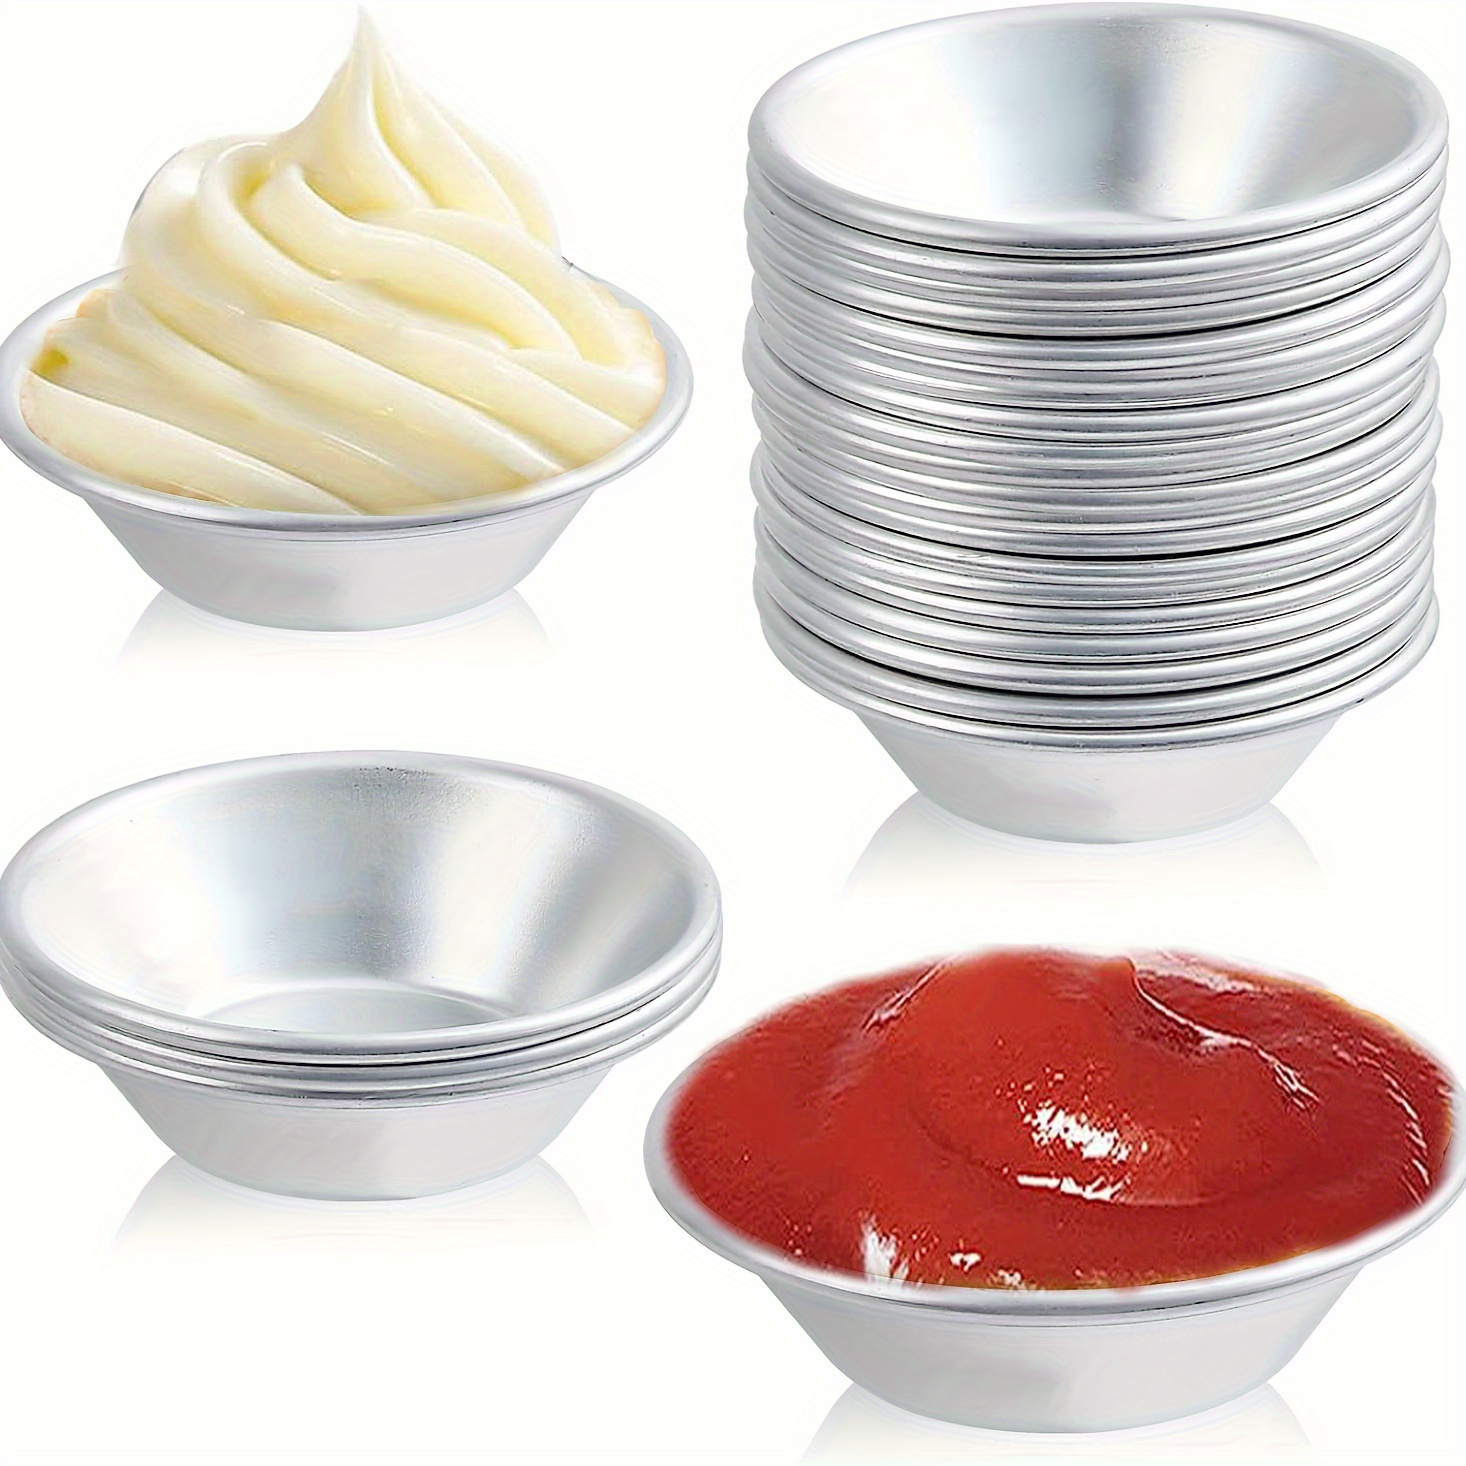 Nechtik Small Sauce Cups, Stainless Steel Ramekin Dipping Sauce Cup, Commercial Grade Individual Round Condiment Cups (12, 15 oz)